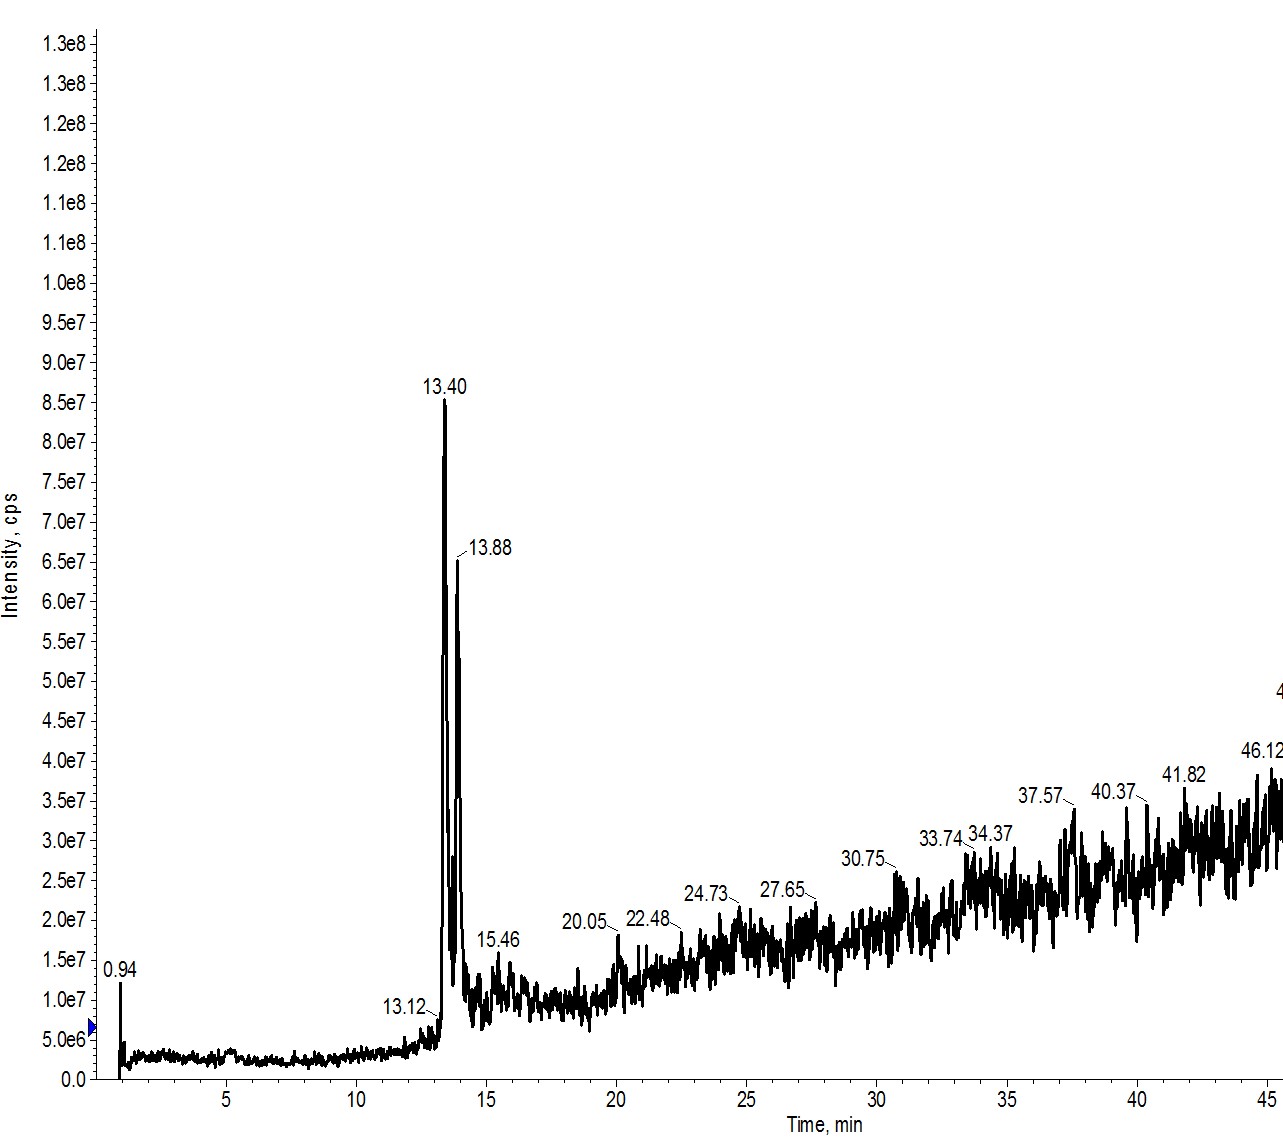 Figure 1: Analytical evaluation of a peptide sample containing a 17- (left peak) and 18-amino acid (right peak) peptide.